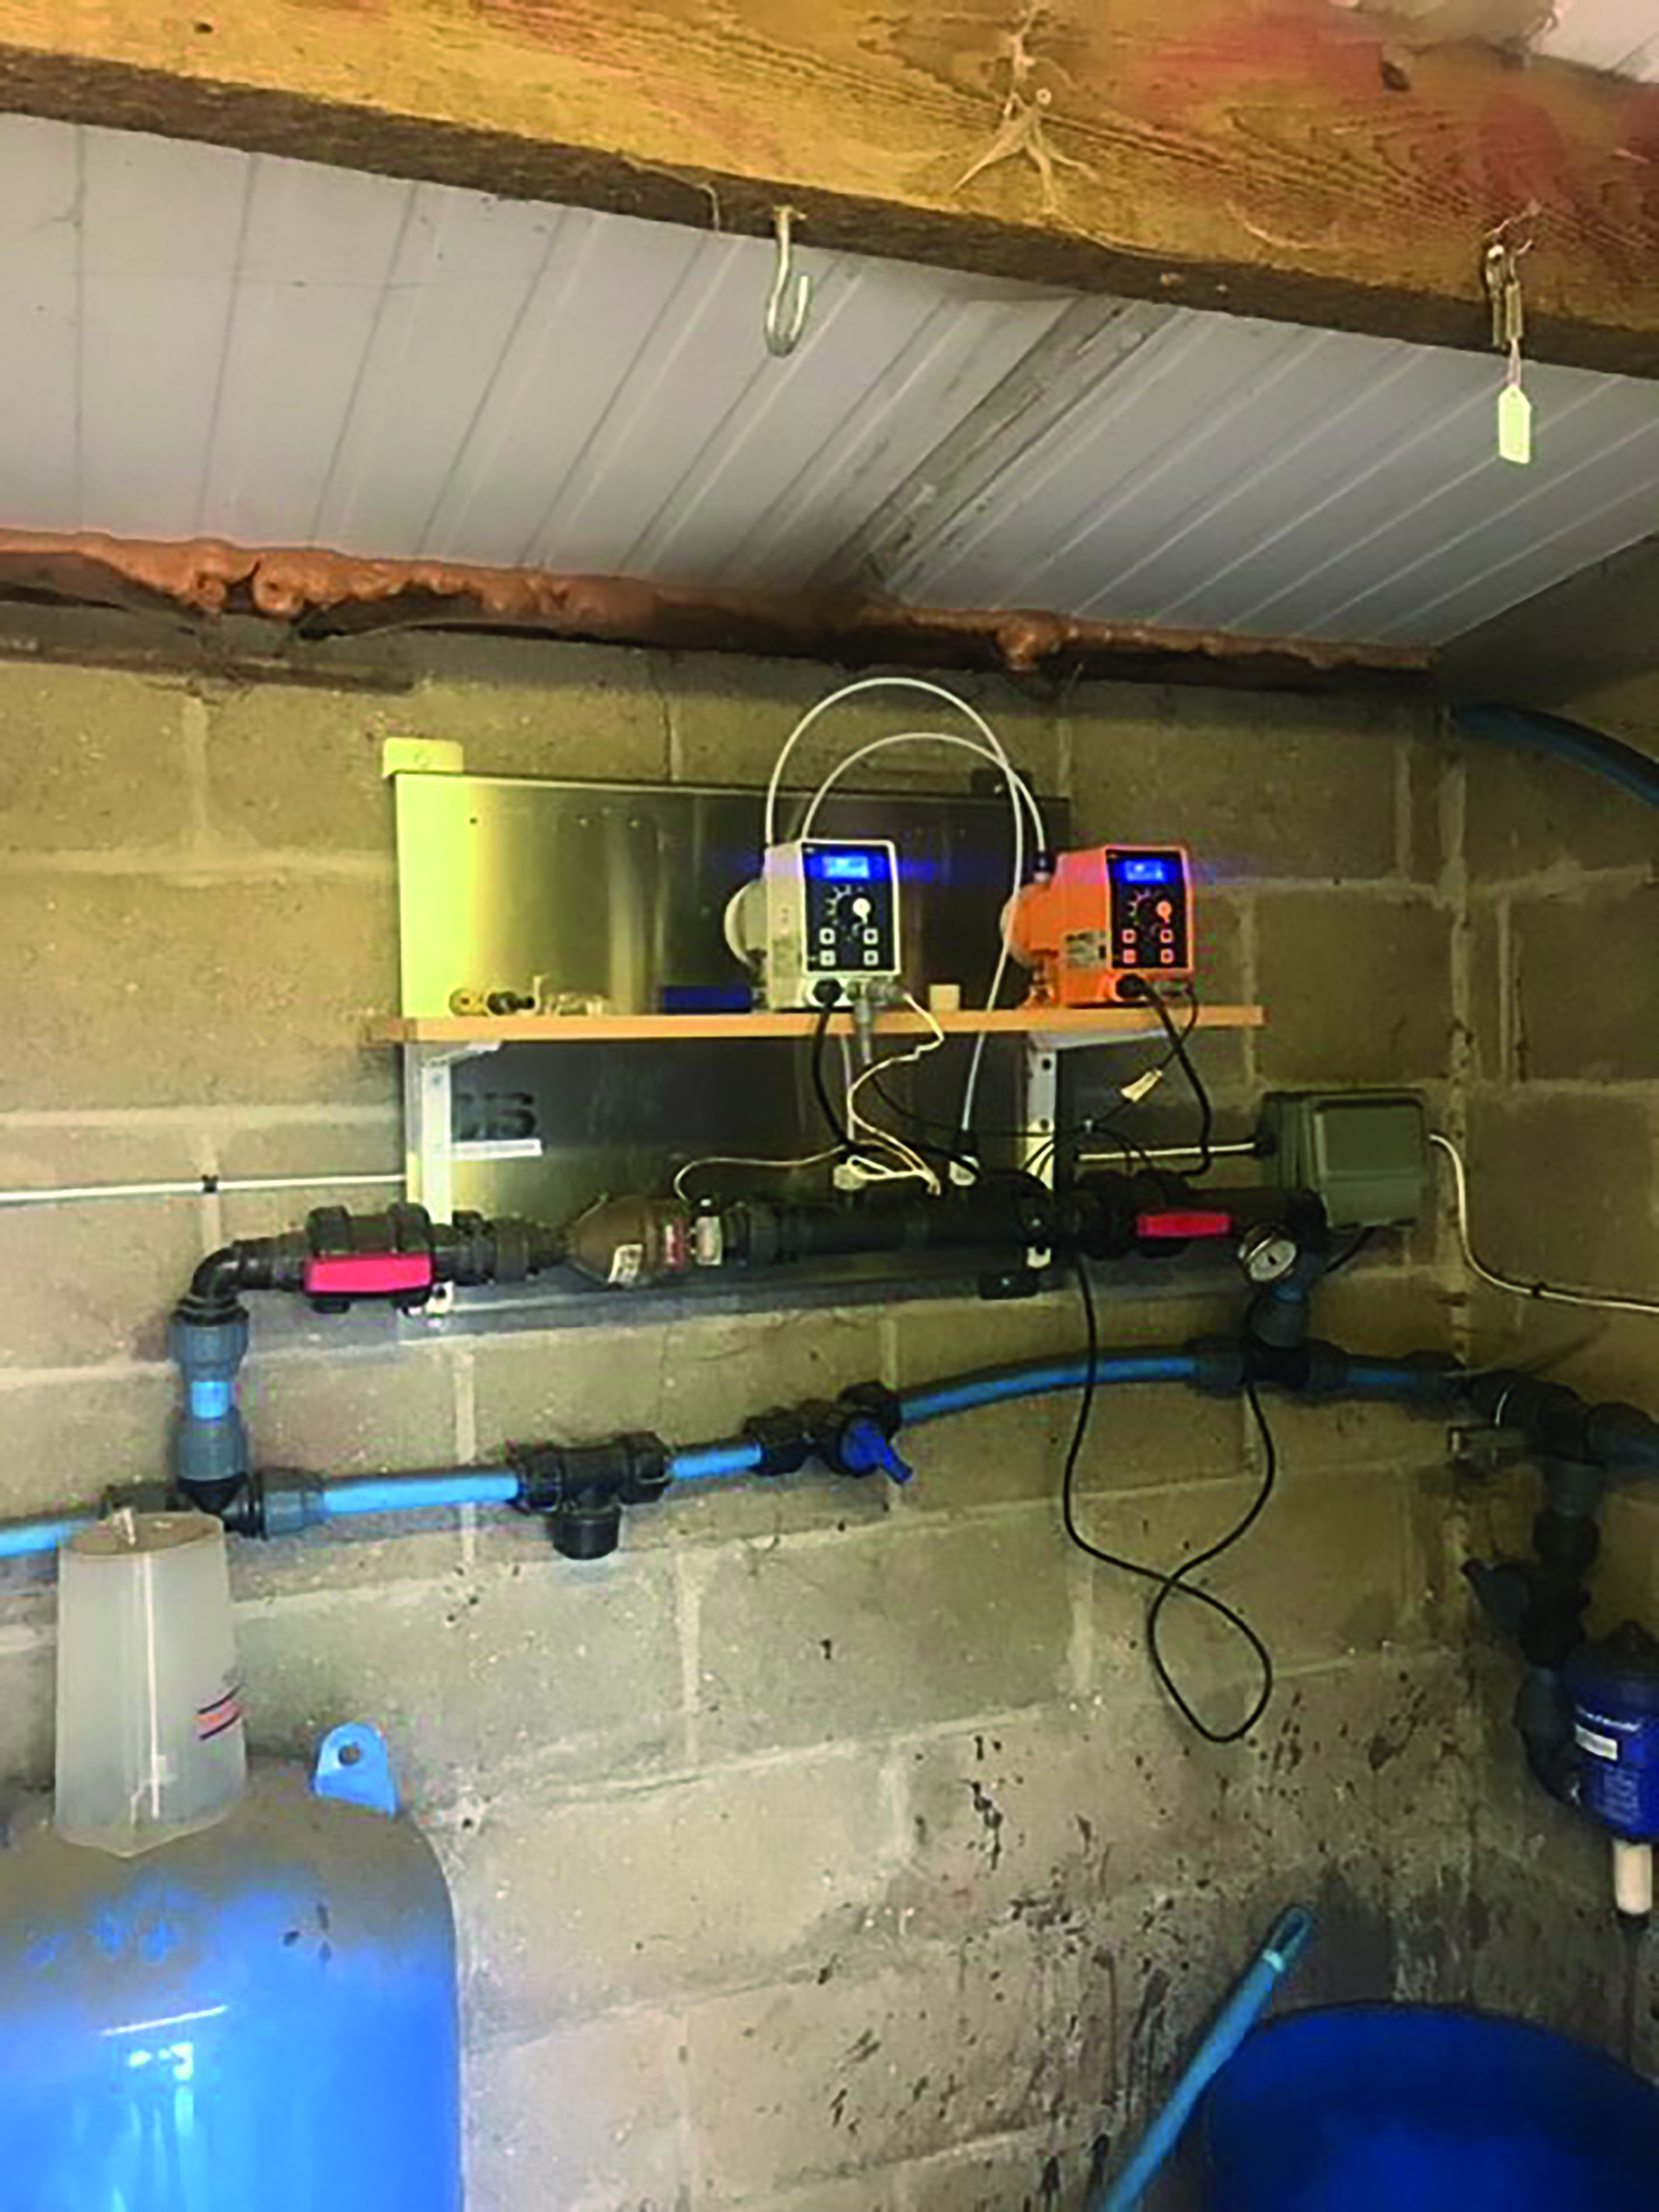 A simple install into an existing pipework system